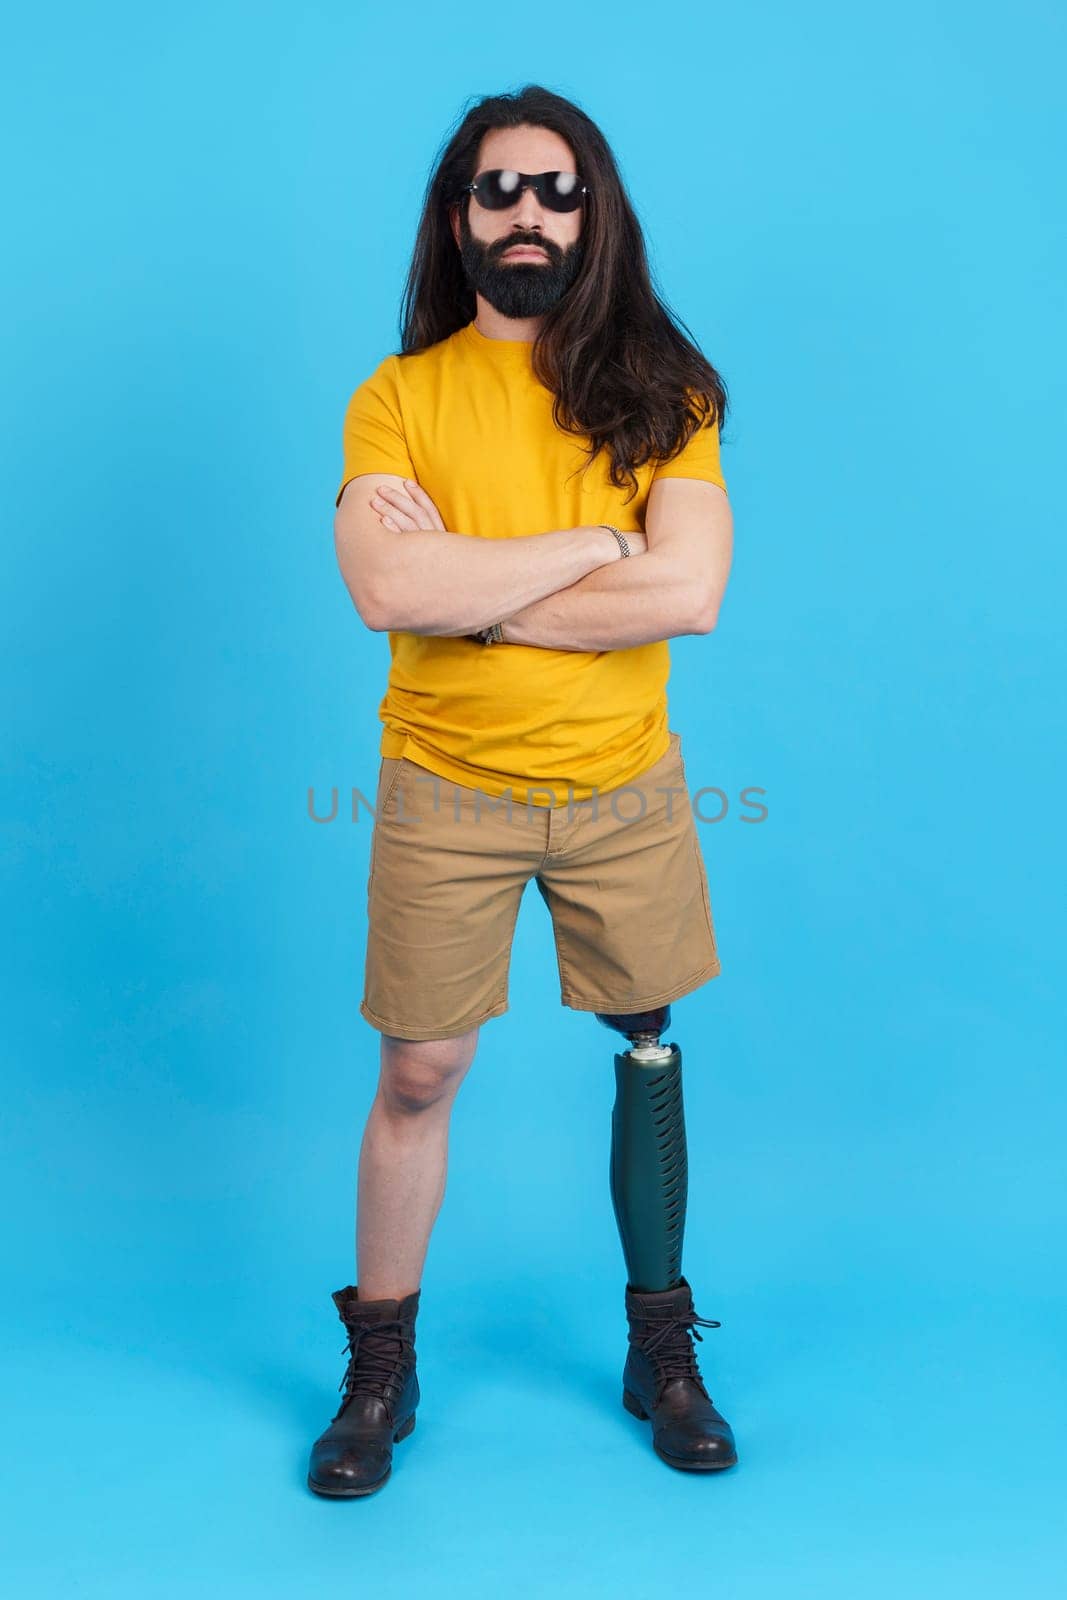 Vertical studio portrait with blue background of a rude man with a leg prosthesis looking at camera with the arms crossed